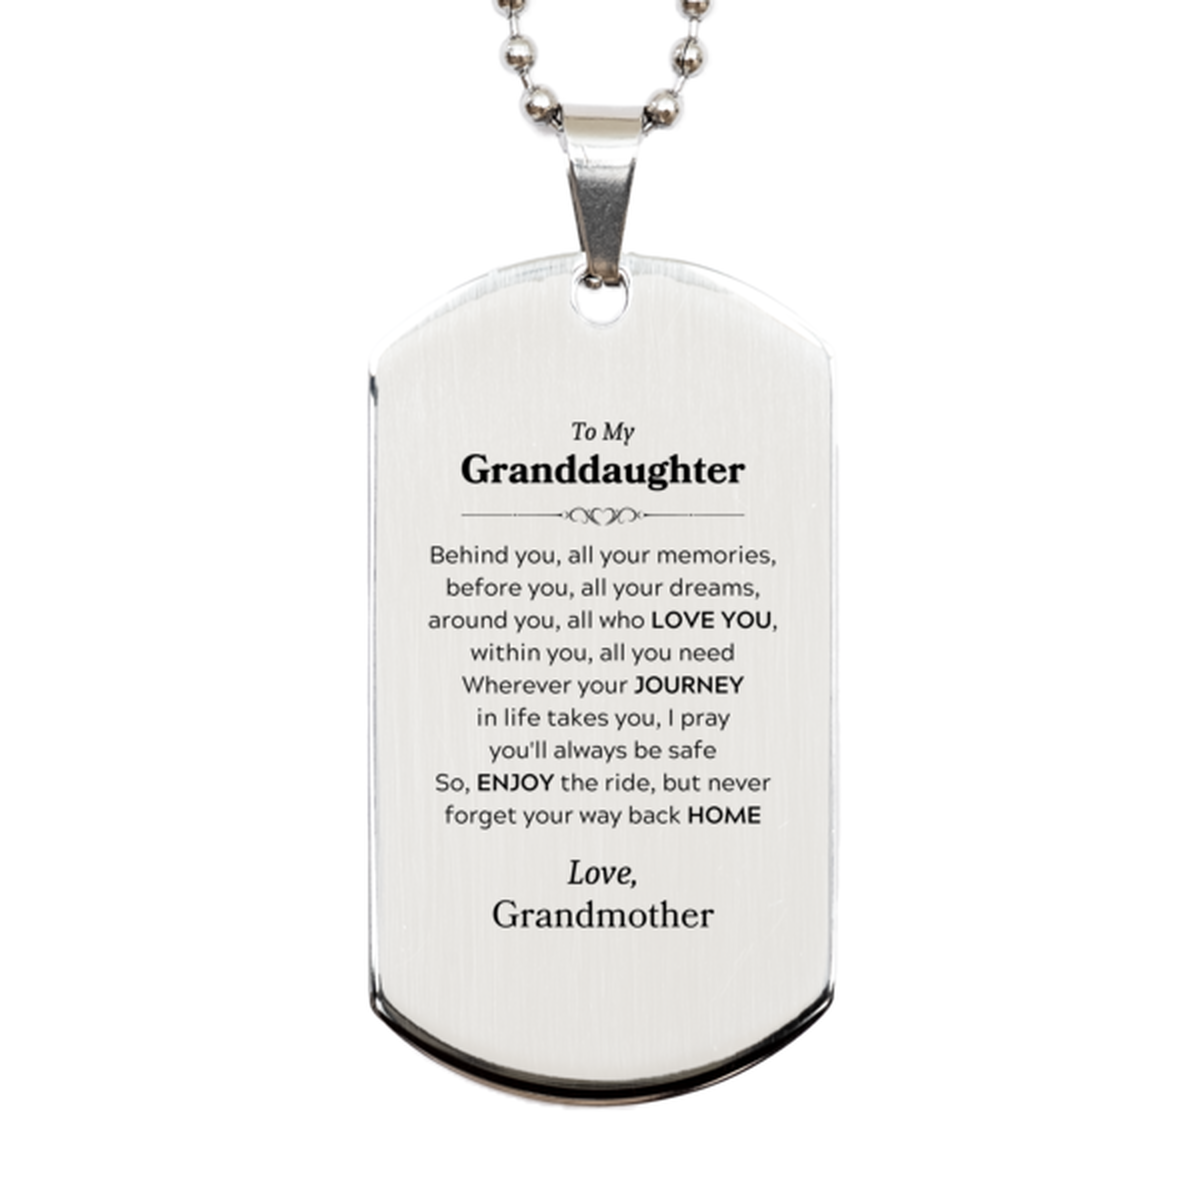 To My Granddaughter Graduation Gifts from Grandmother, Granddaughter Silver Dog Tag Christmas Birthday Gifts for Granddaughter Behind you, all your memories, before you, all your dreams. Love, Grandmother